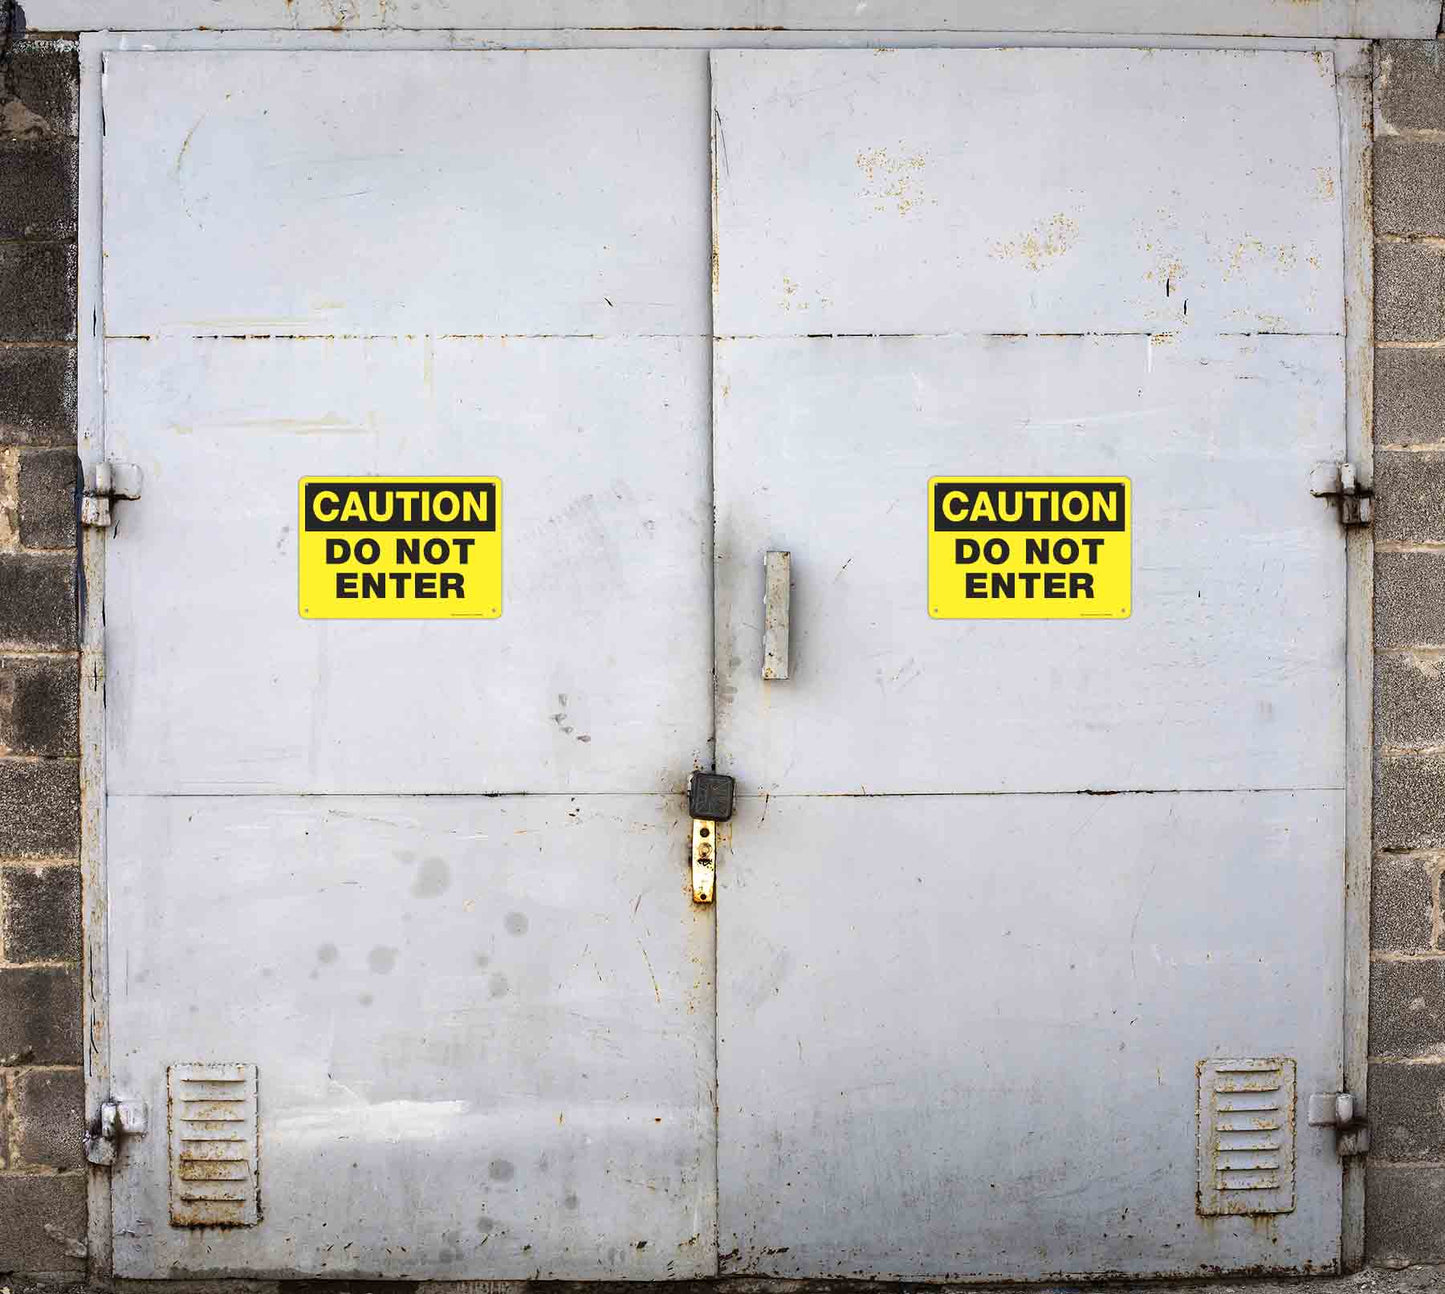 Caution Do Not Enter aluminum sign and vinyl sticker sign installed on metal doors.